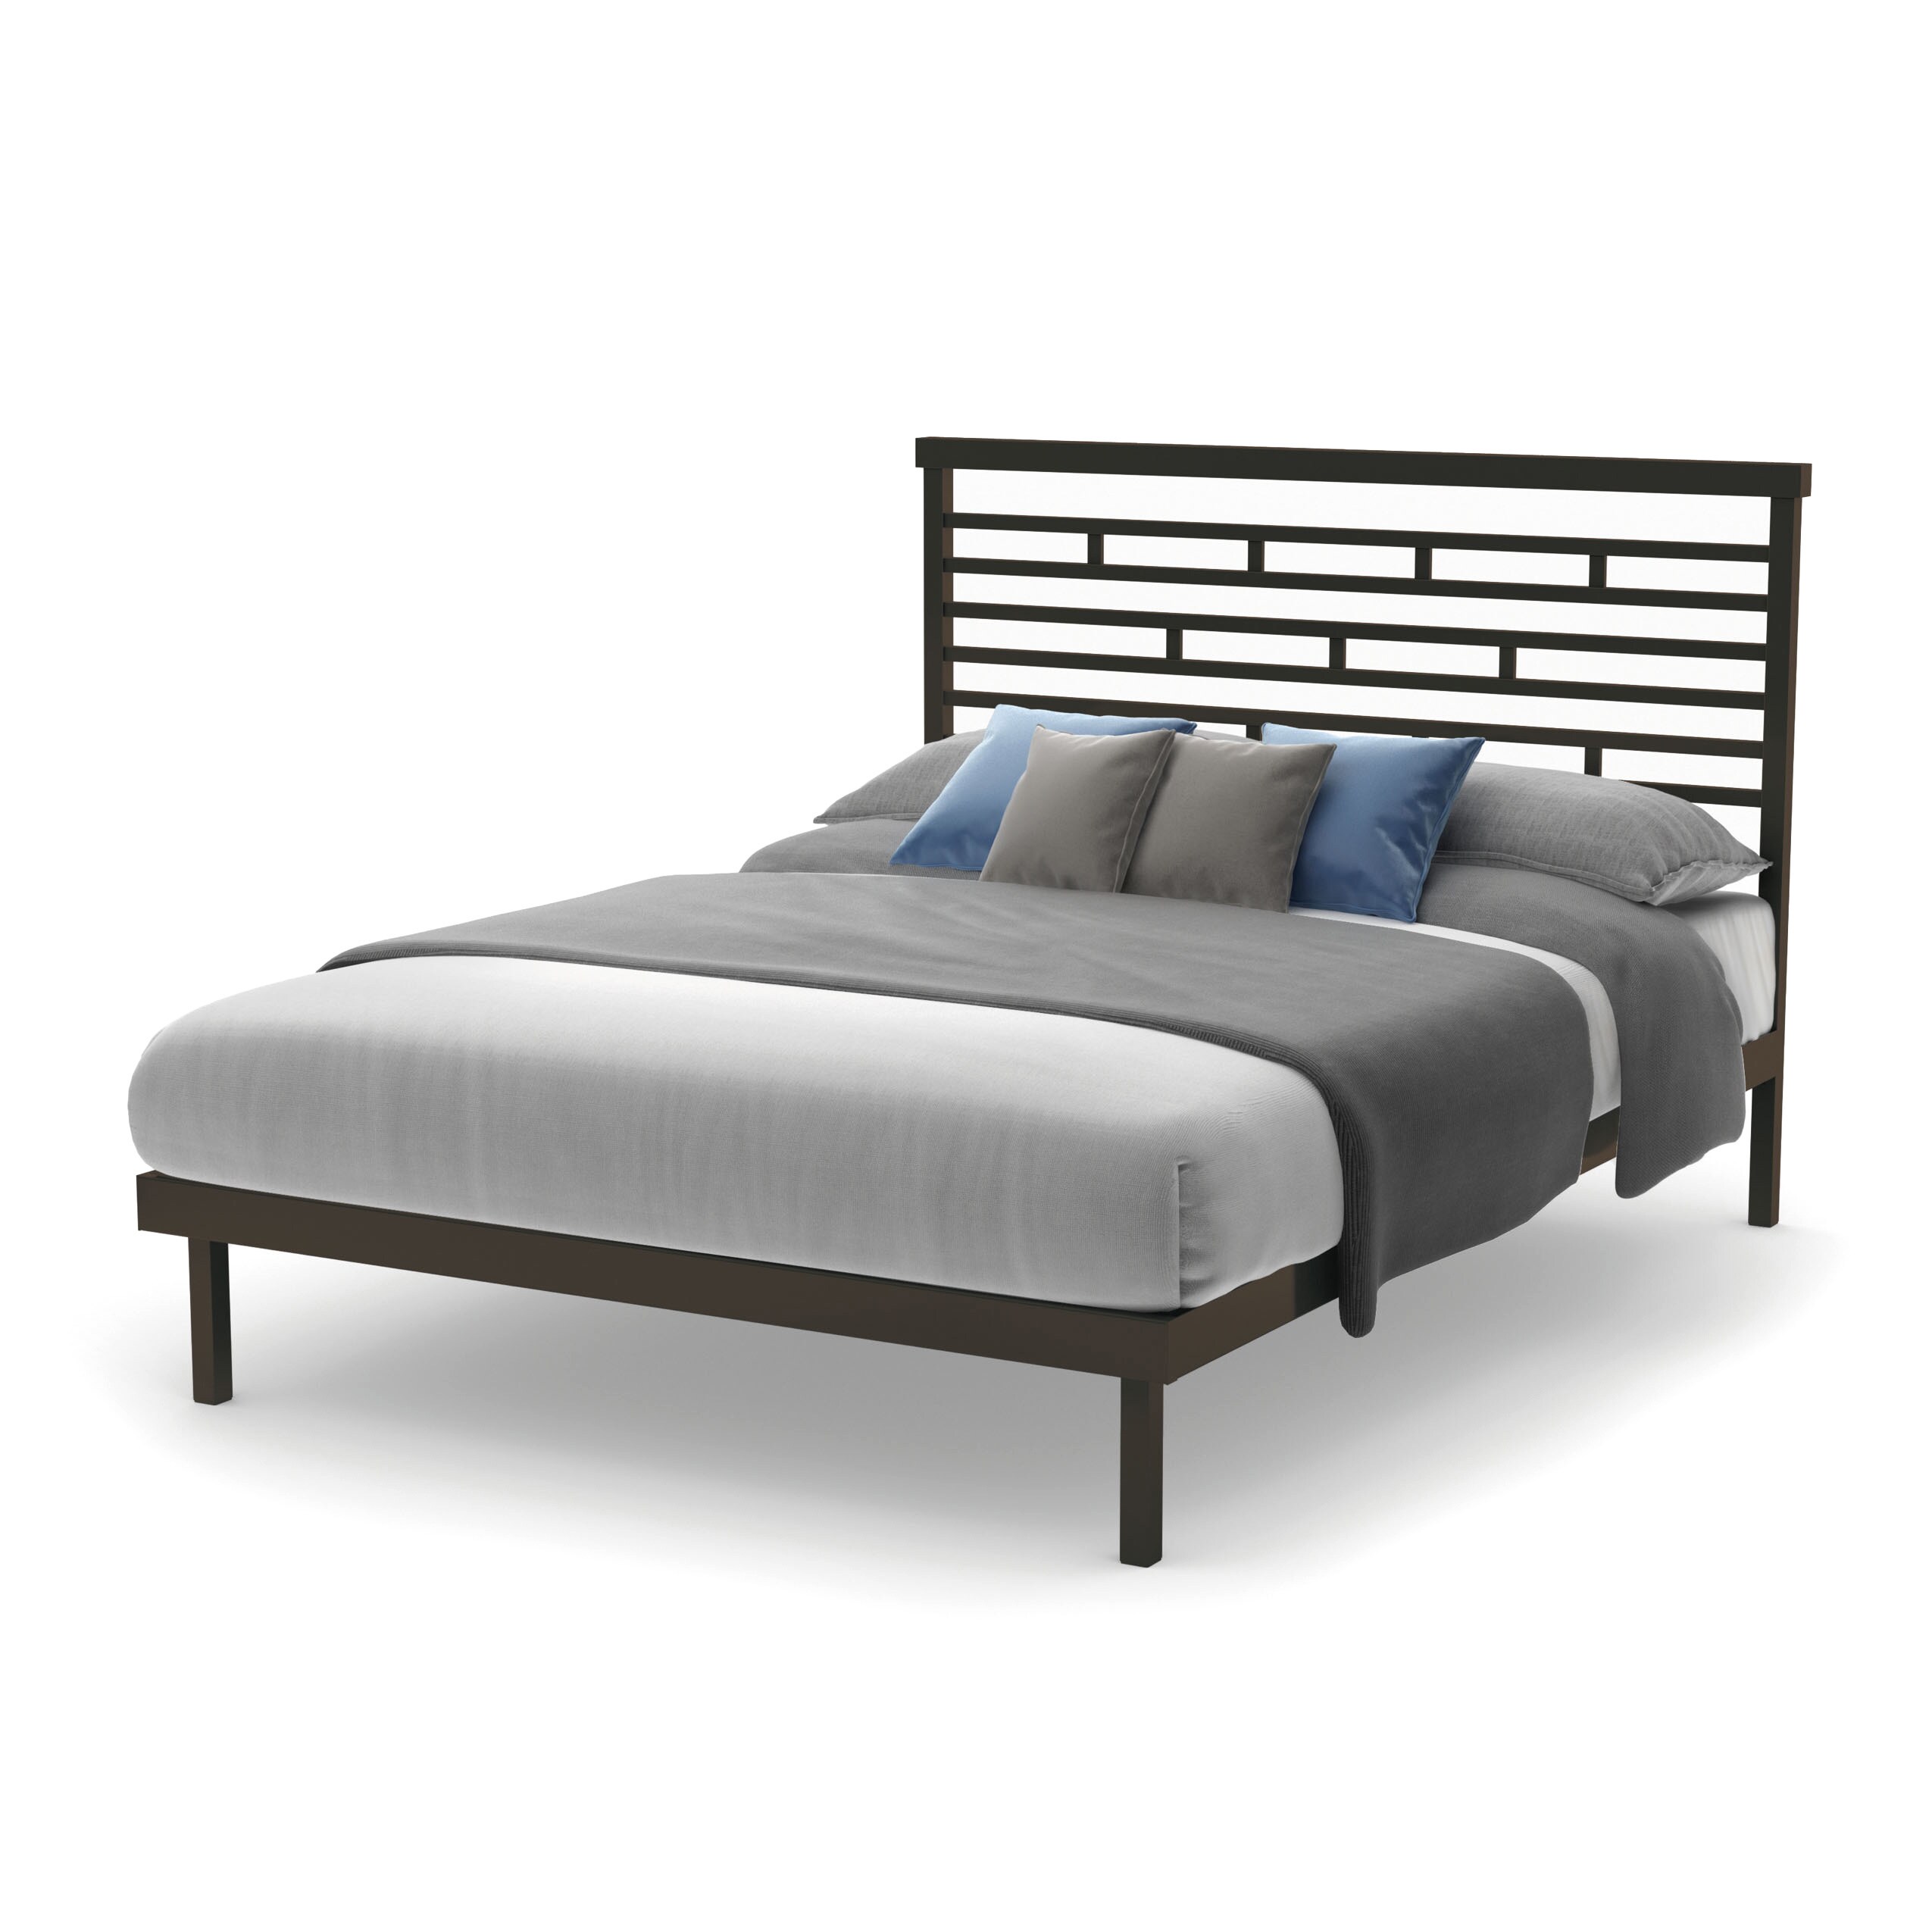 Amisco Highway Full Size Metal Platform Bed 54inches  Overstock 